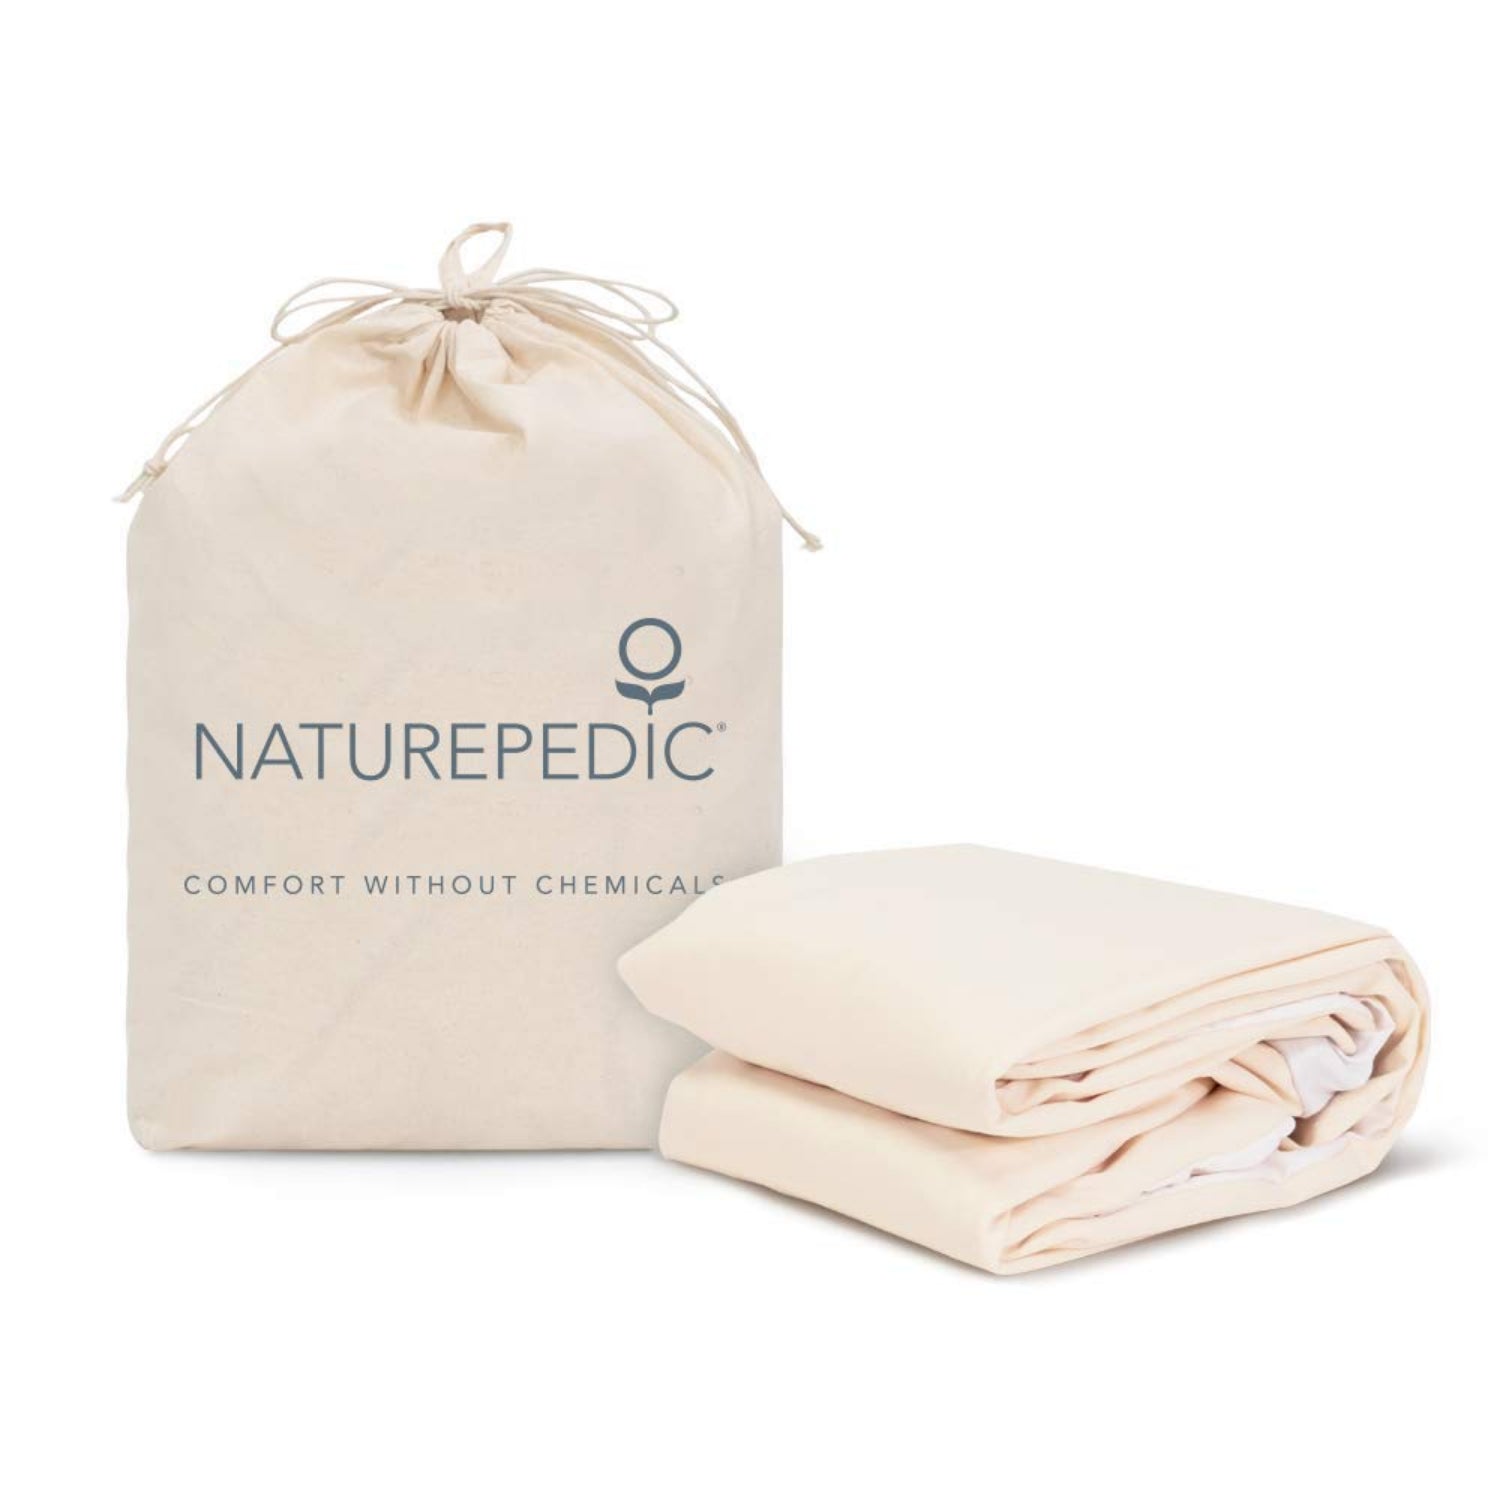 Naturepedic Organic Waterproof Mattress Protector Pad, Fitted Stretch Knit Mattress Cover for 9''-16